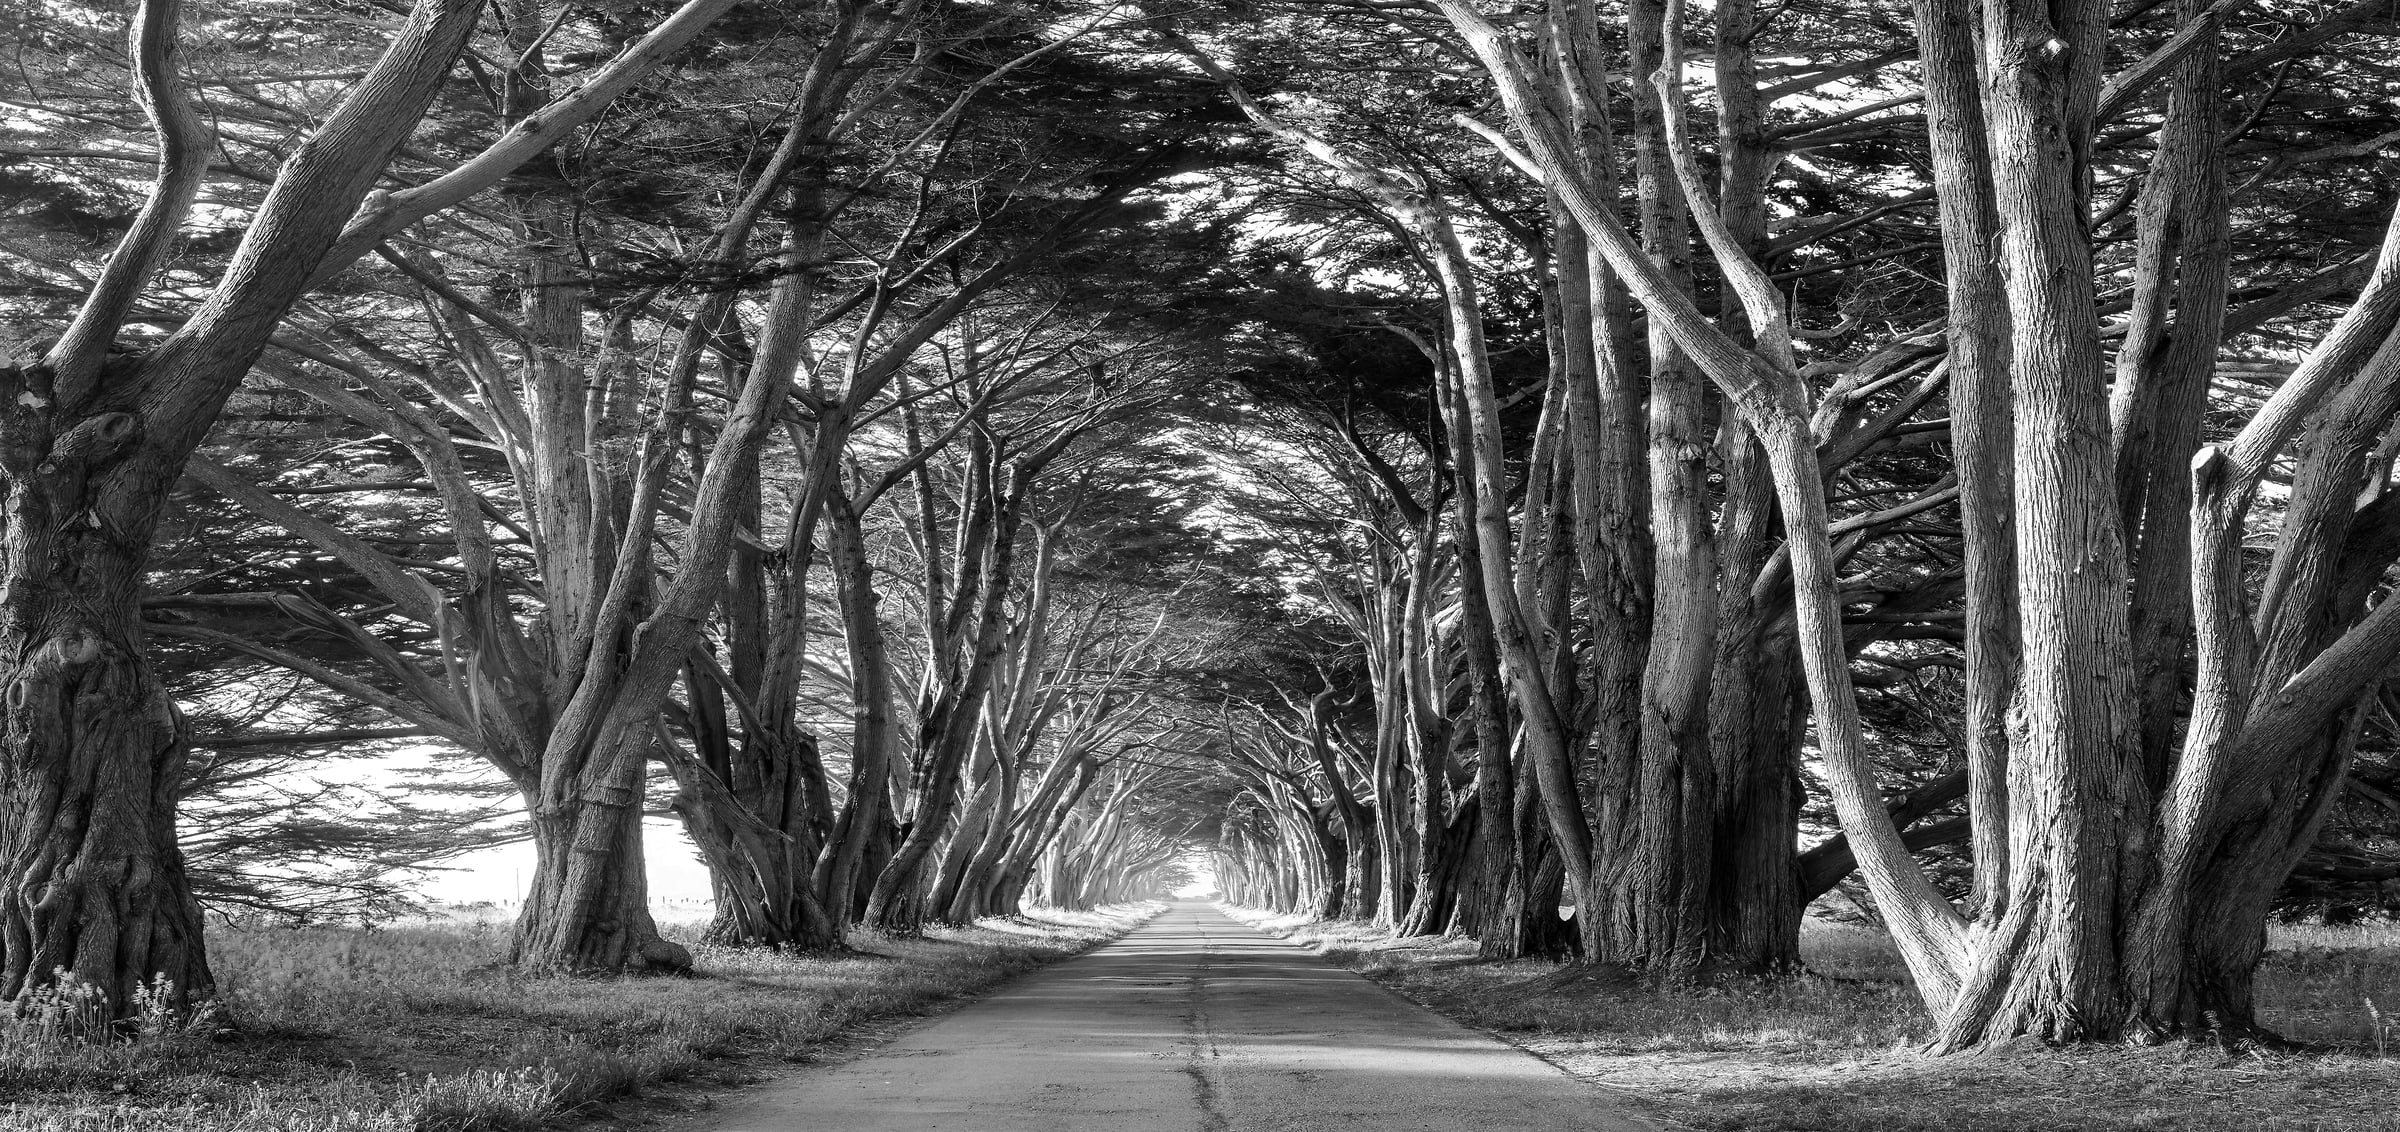 535 megapixels! A very high resolution, large-format, black & white, VAST photo of a tunnel of cypress trees with a road going down the middle; fine art nature photograph created by Justin Katz in Point Reyes National Seashore, California.